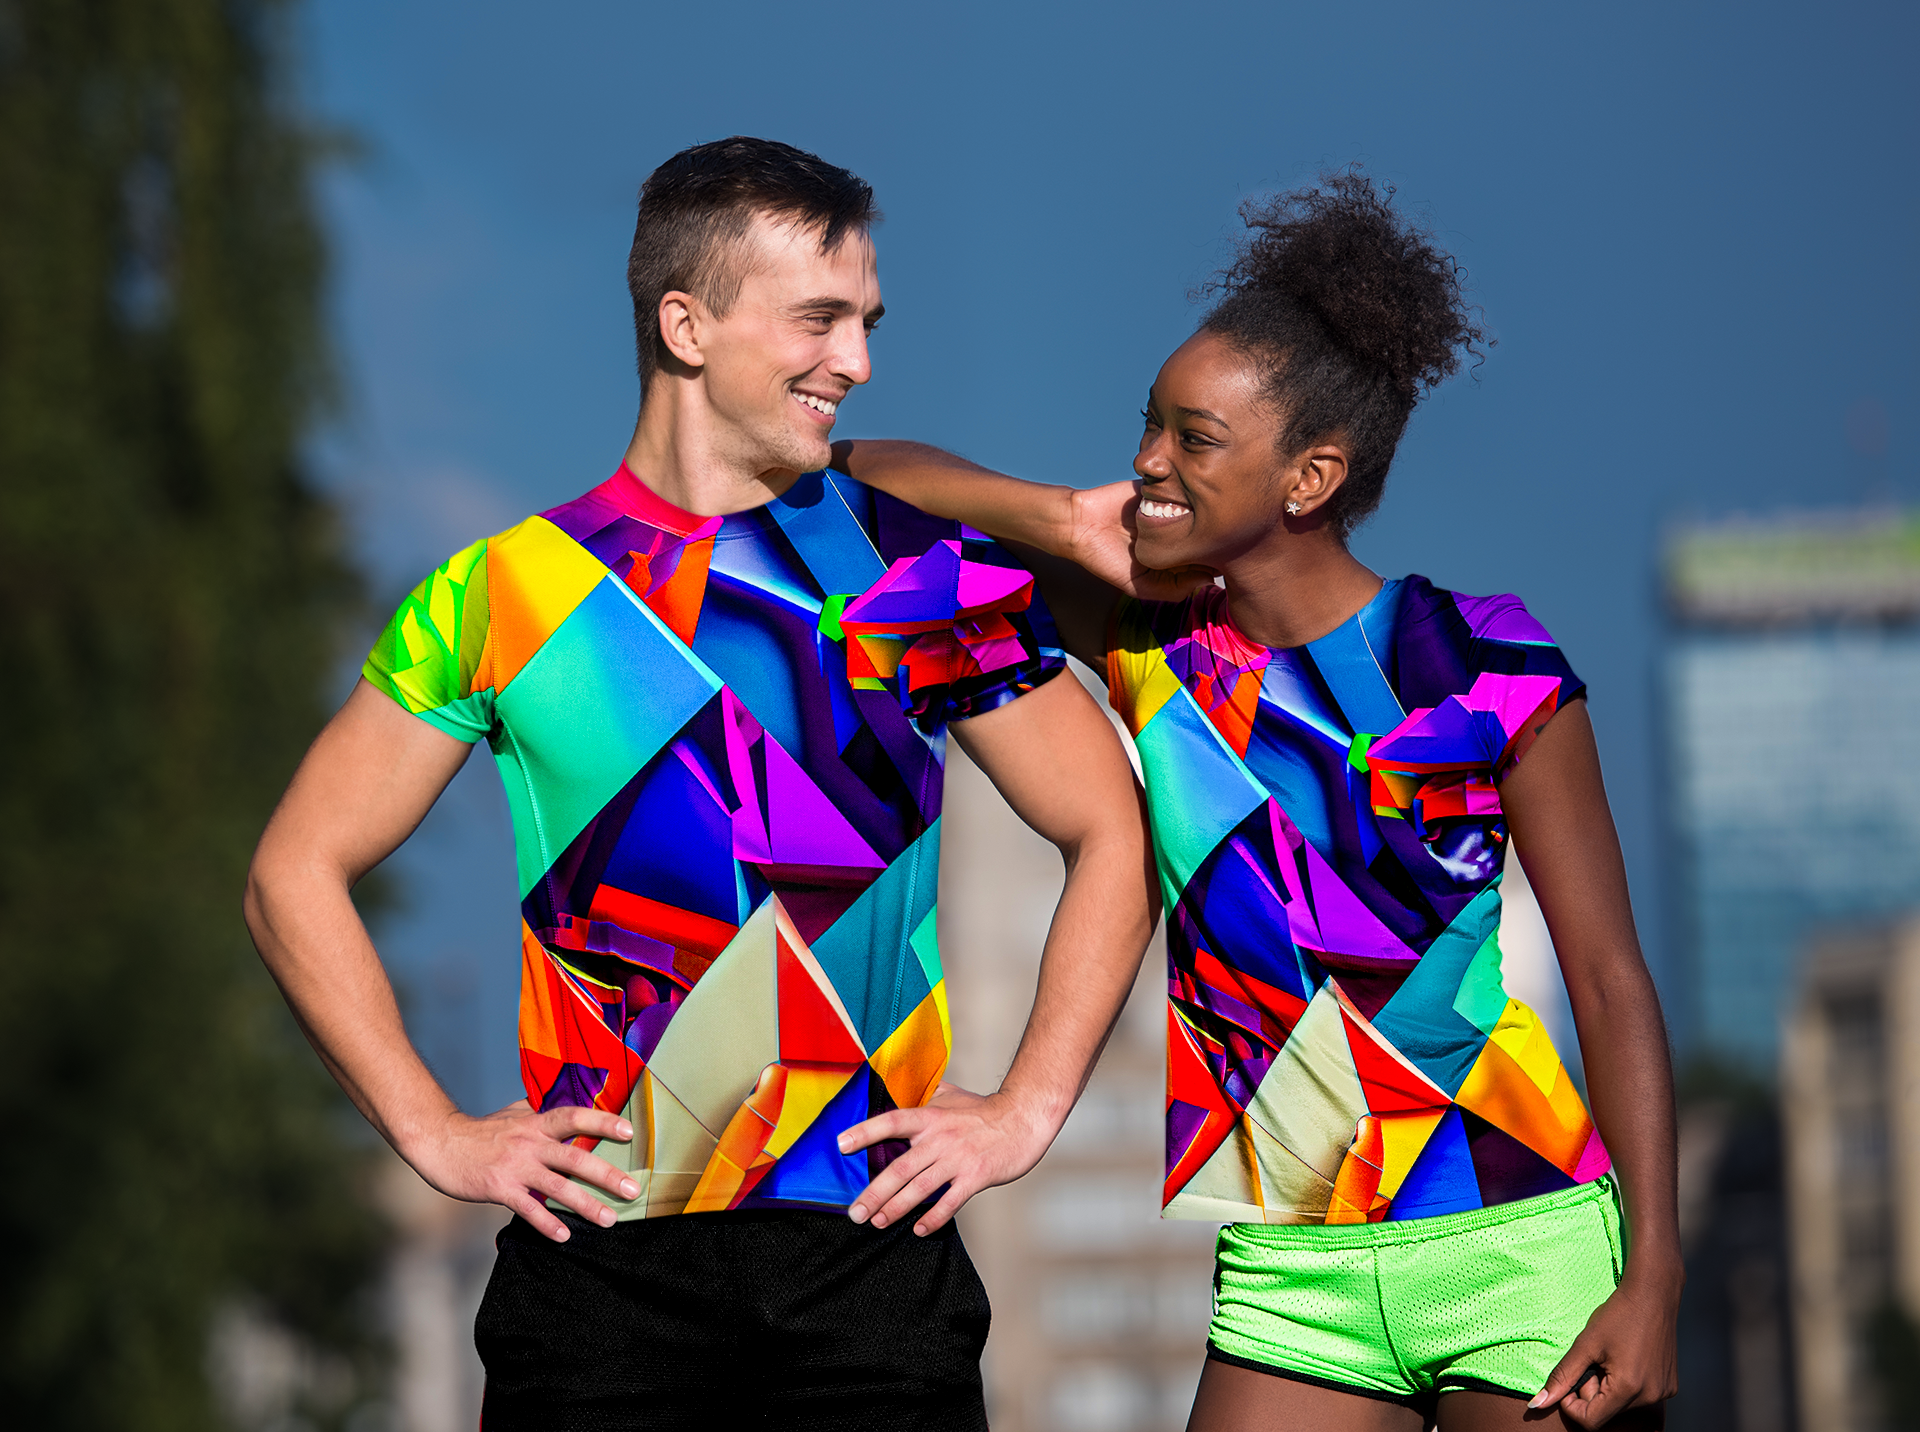 "PRIDE IN UNITY" - Pride and Unity Themed Unisex T-shirt